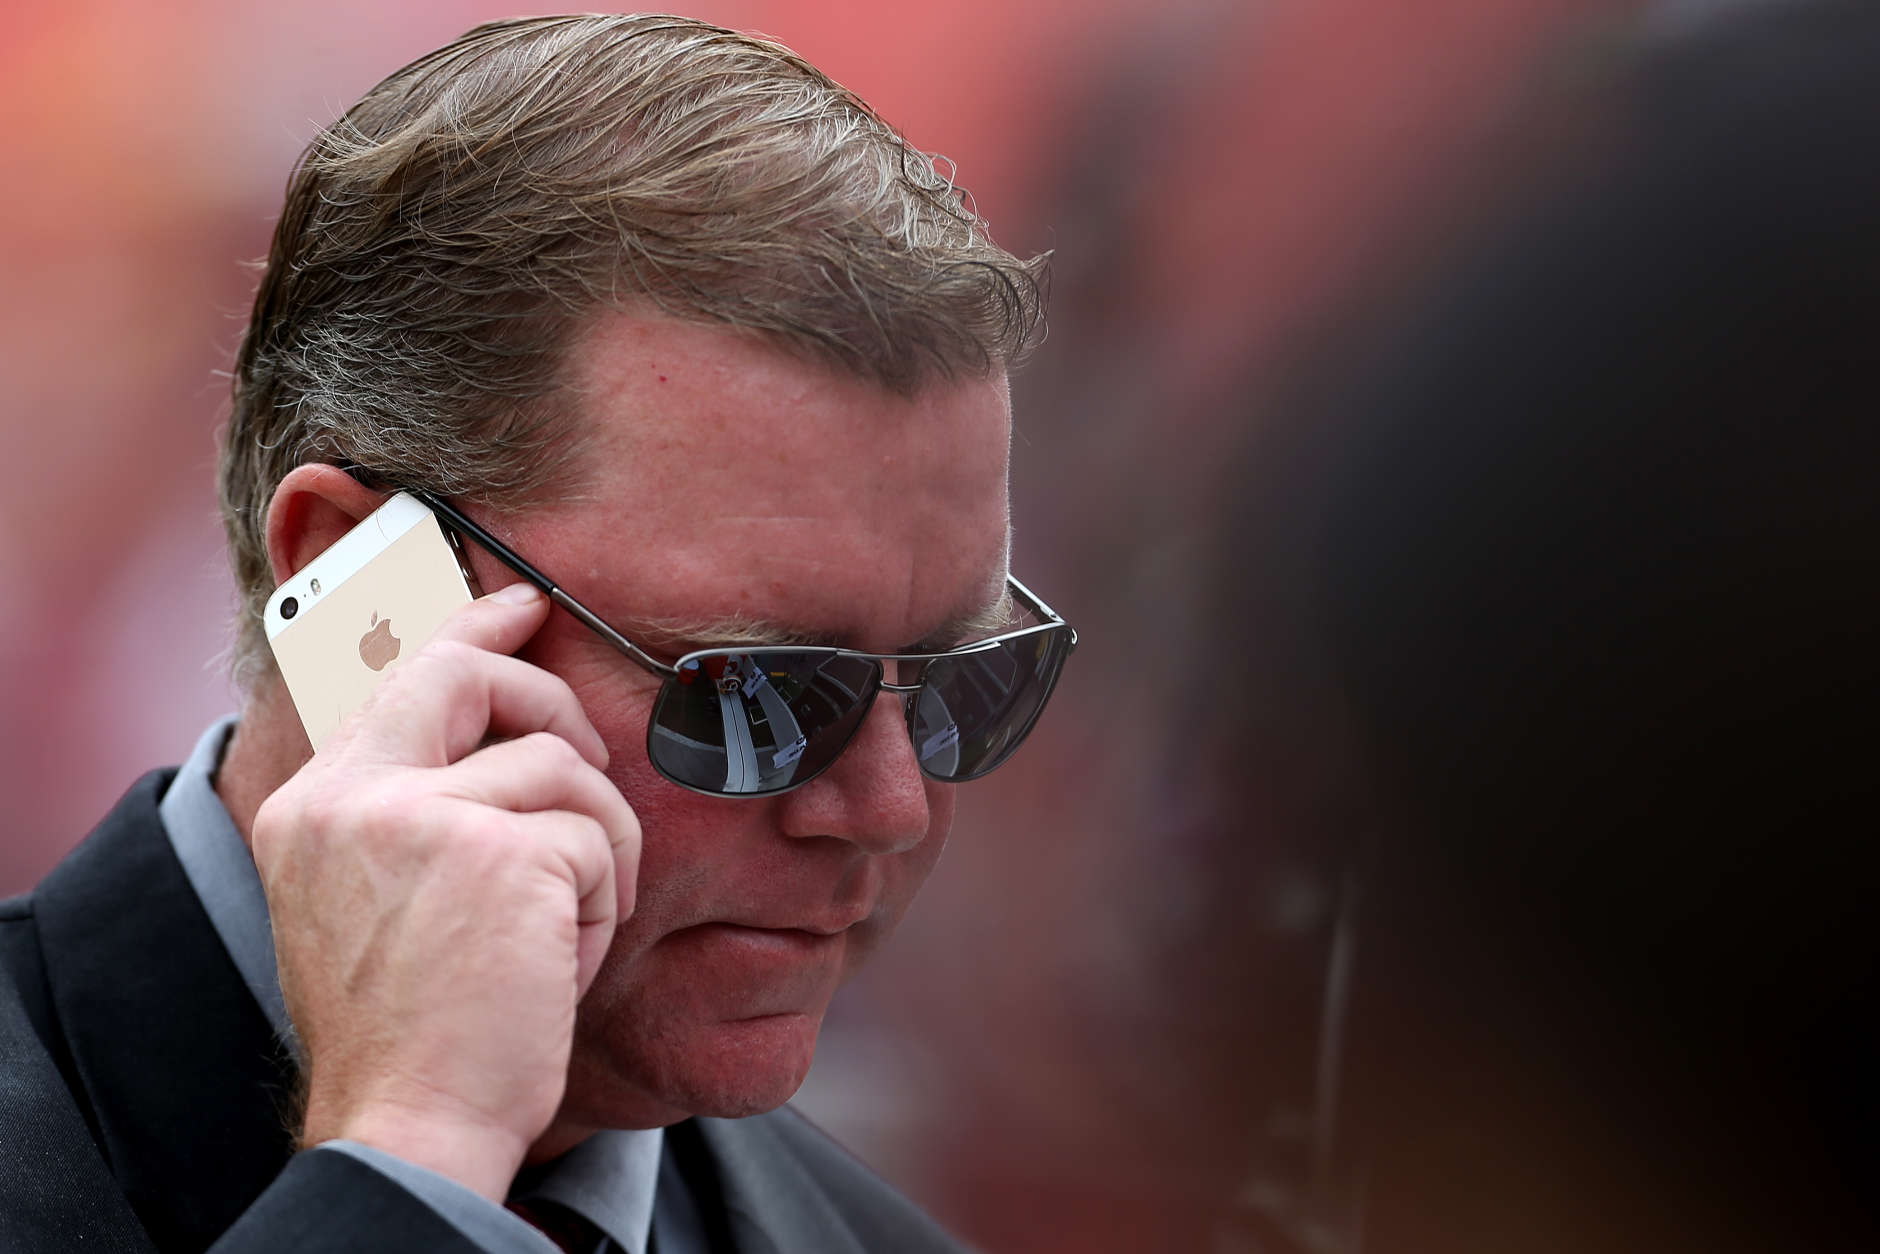 LANDOVER, MD - SEPTEMBER 20: General Manager Scot McCloughan of the Washington Redskins talks on the phone prior to the start of a game against the St. Louis Rams at FedExField on September 20, 2015 in Landover, Maryland. (Photo by Matt Hazlett/Getty Images)